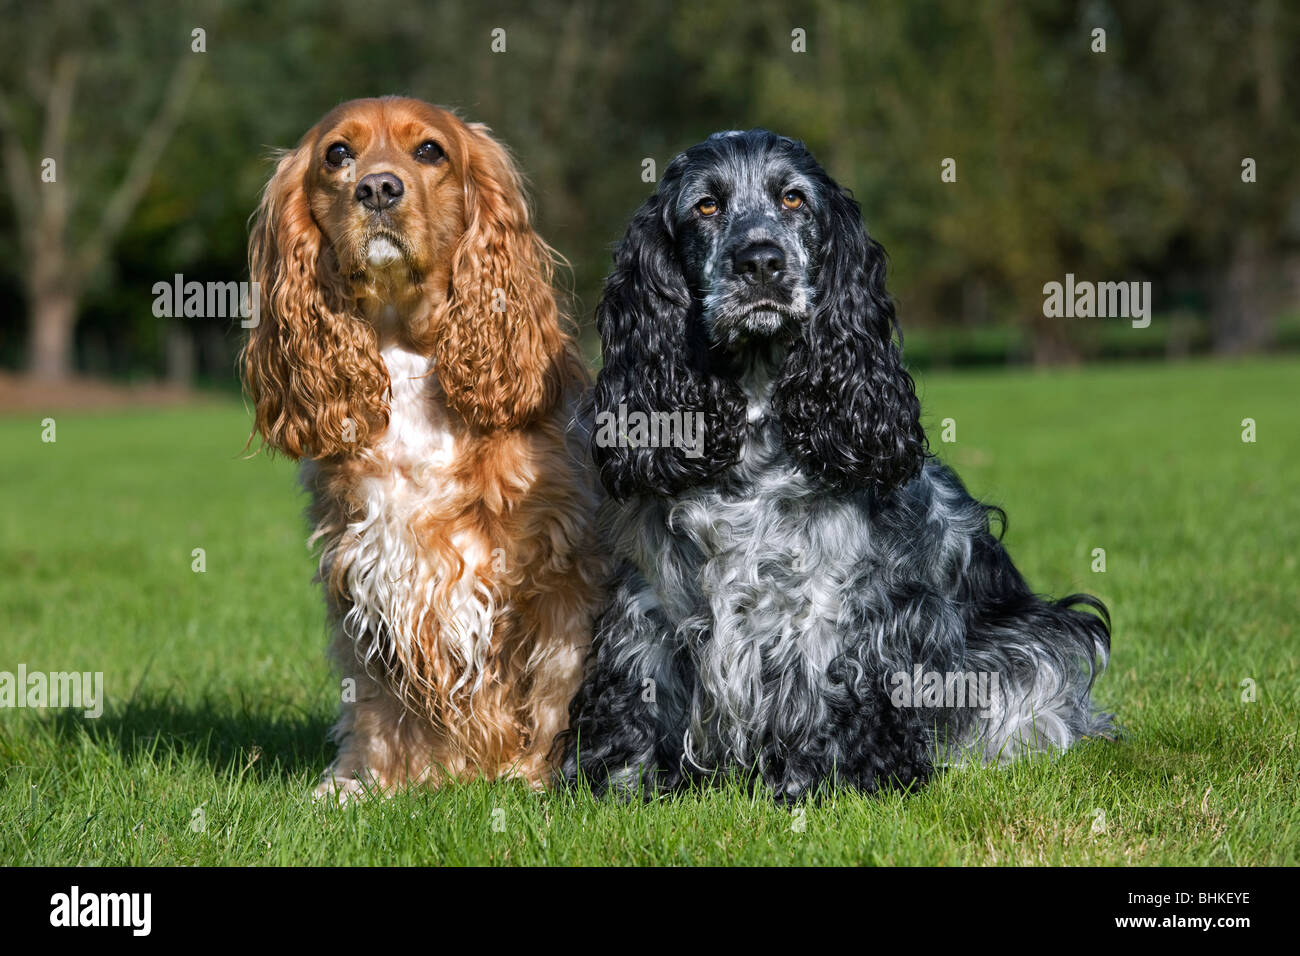 Two English Cocker Spaniels (Canis lupus familiaris) sitting in garden Stock Photo